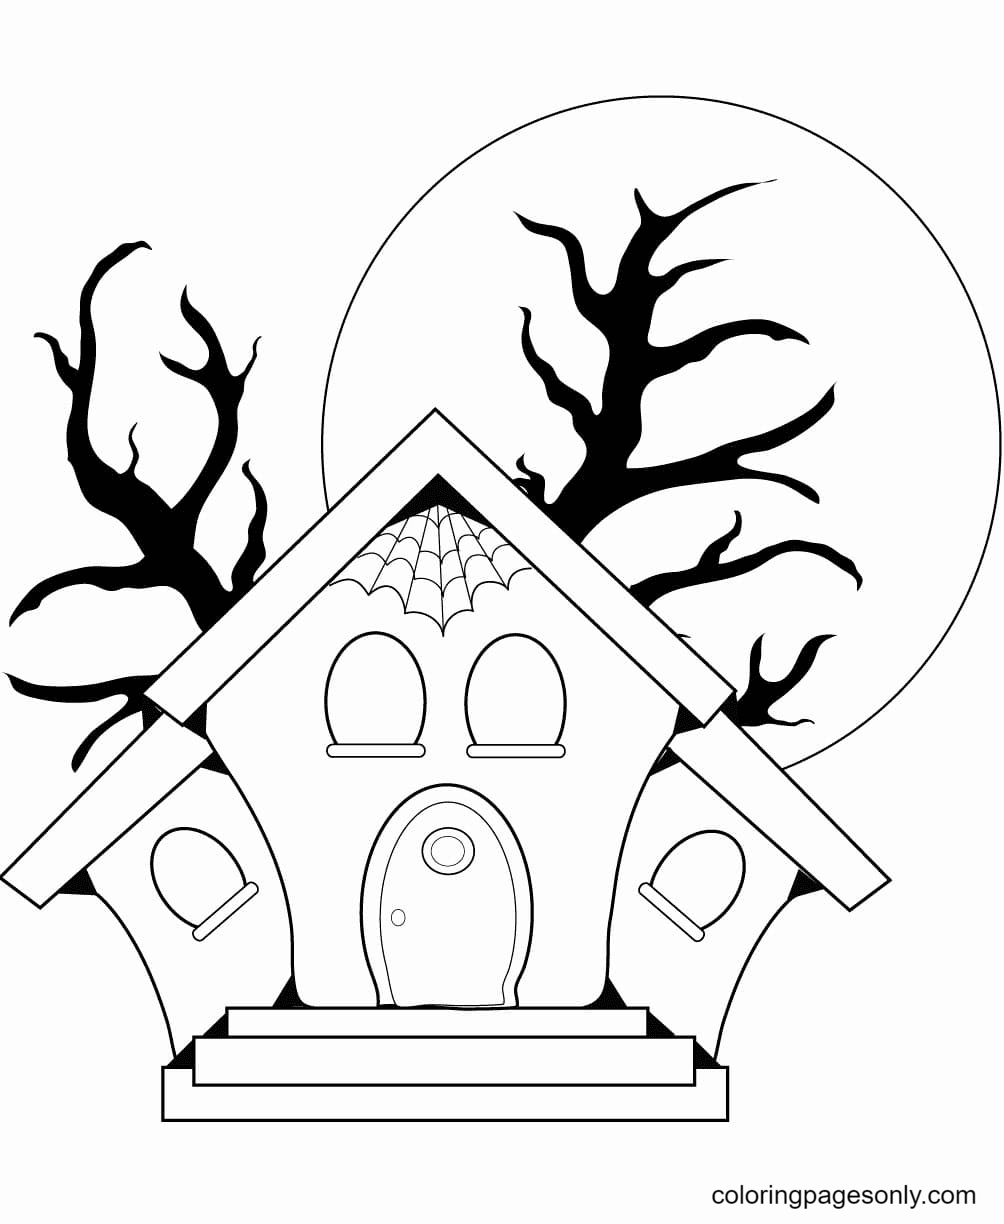 Printable Haunted House Coloring Pages Haunted House Coloring Pages Coloring Pages For Kids And Adults